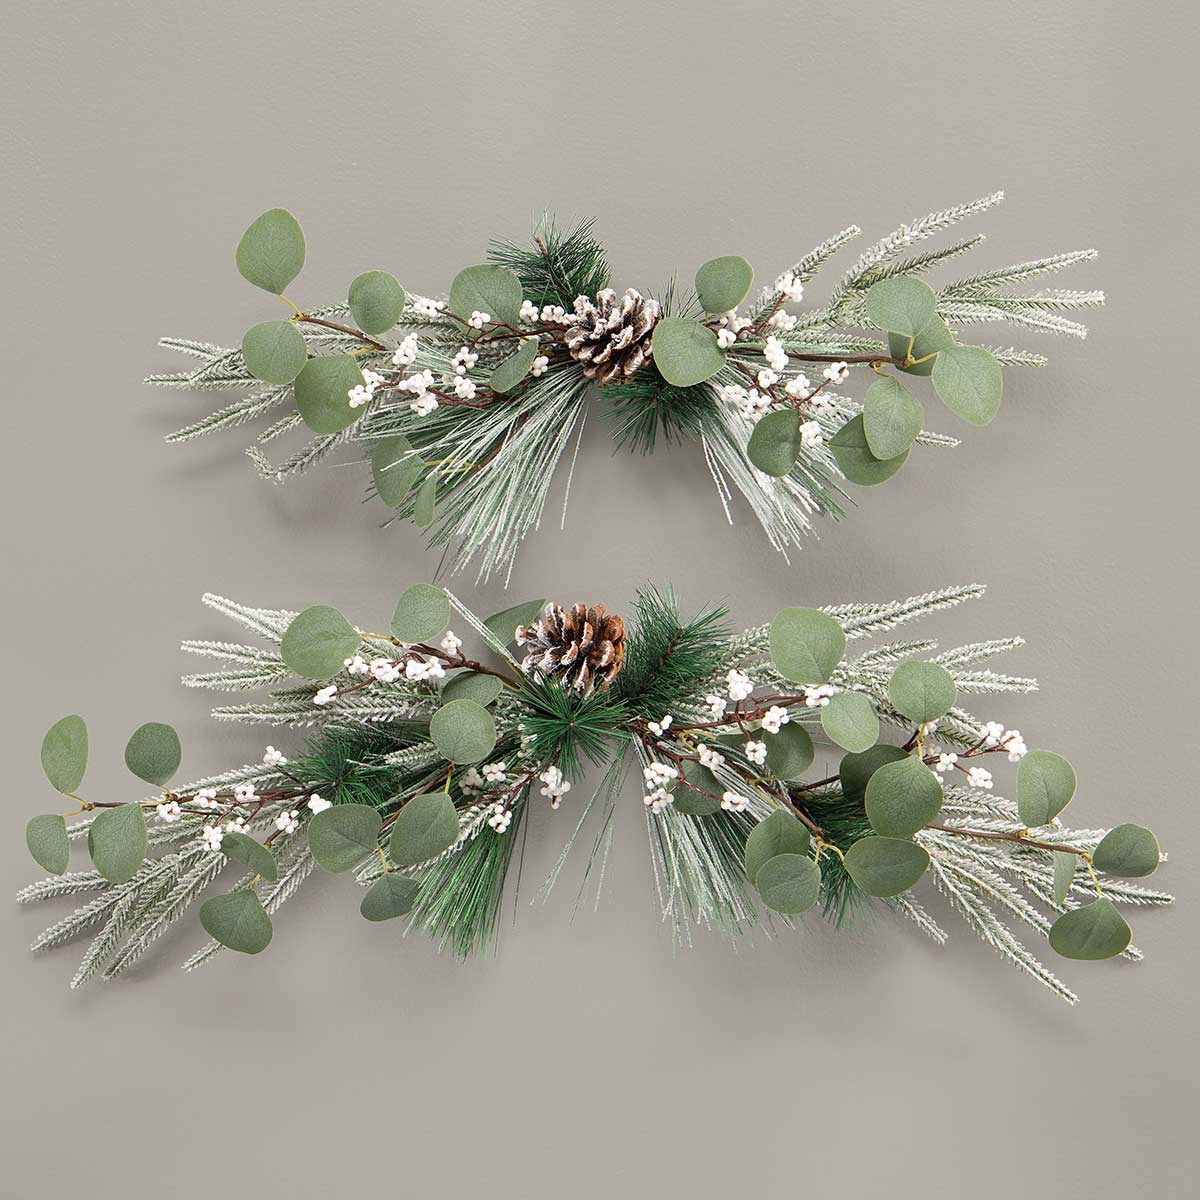 !SNOWBERRY PINE CRESCENT GREEN WITH SNOW, WHITE BERRIES v22